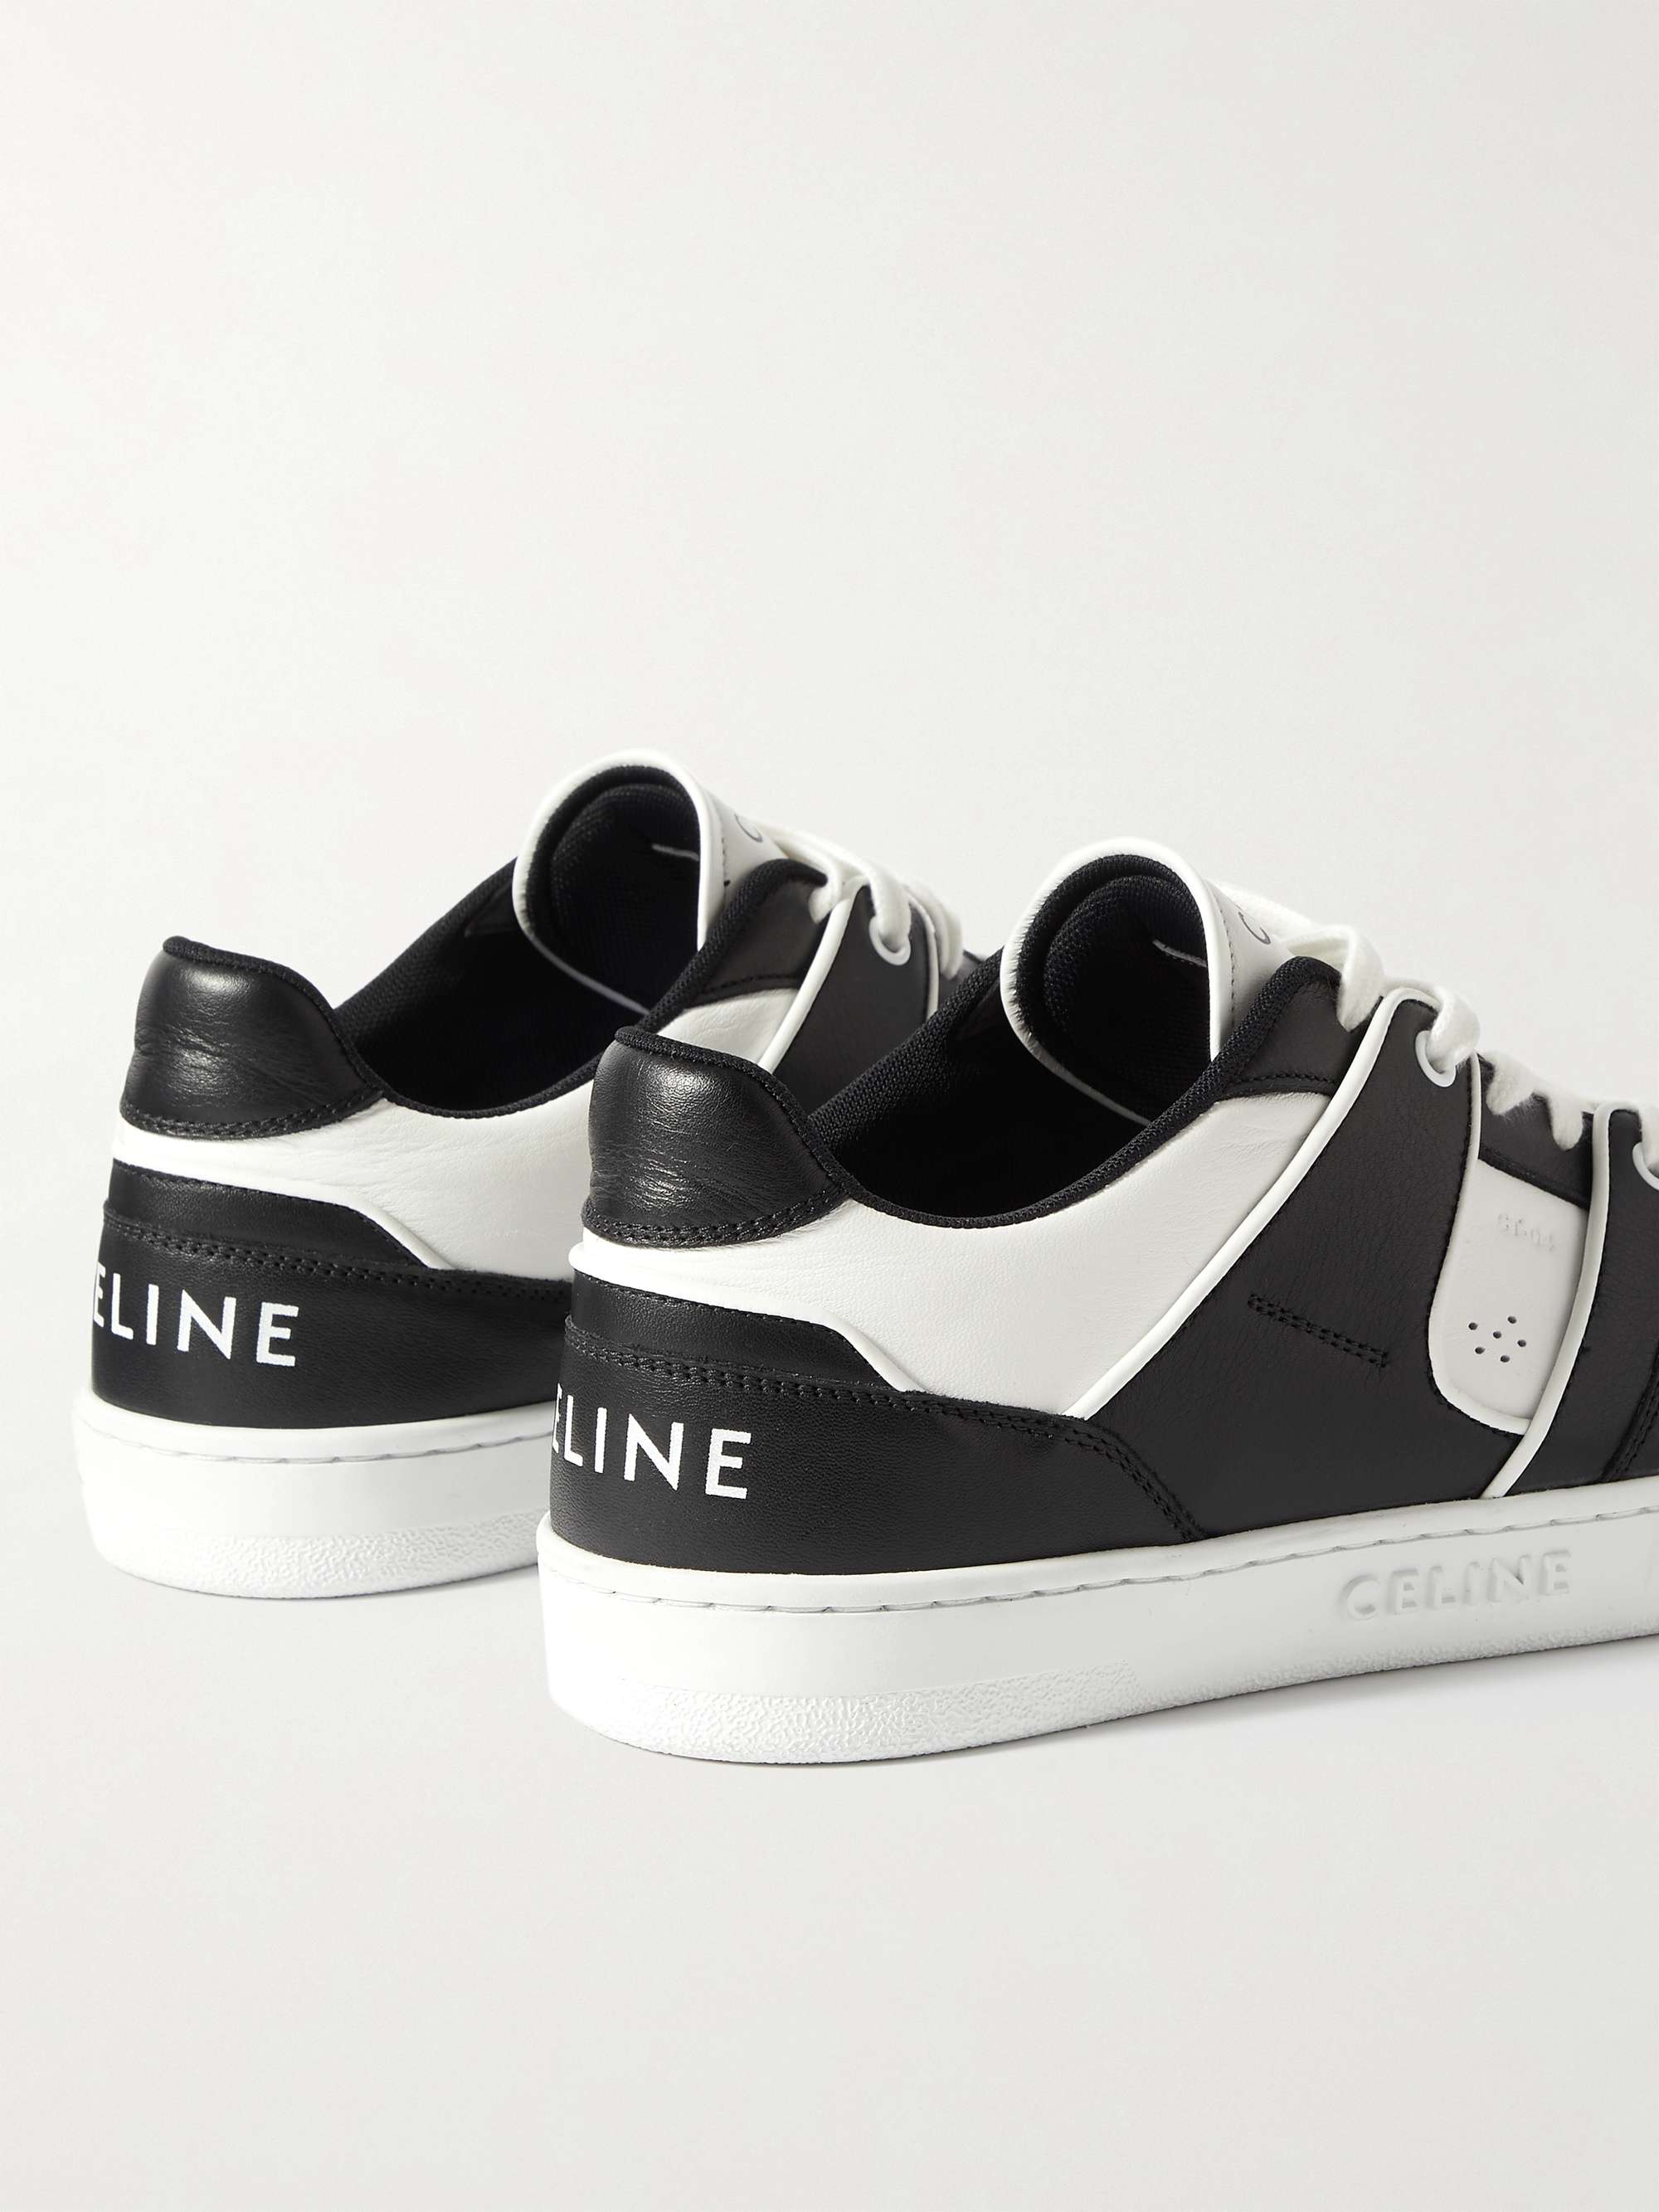 CELINE HOMME CT-04 Leather Sneakers | MR PORTER